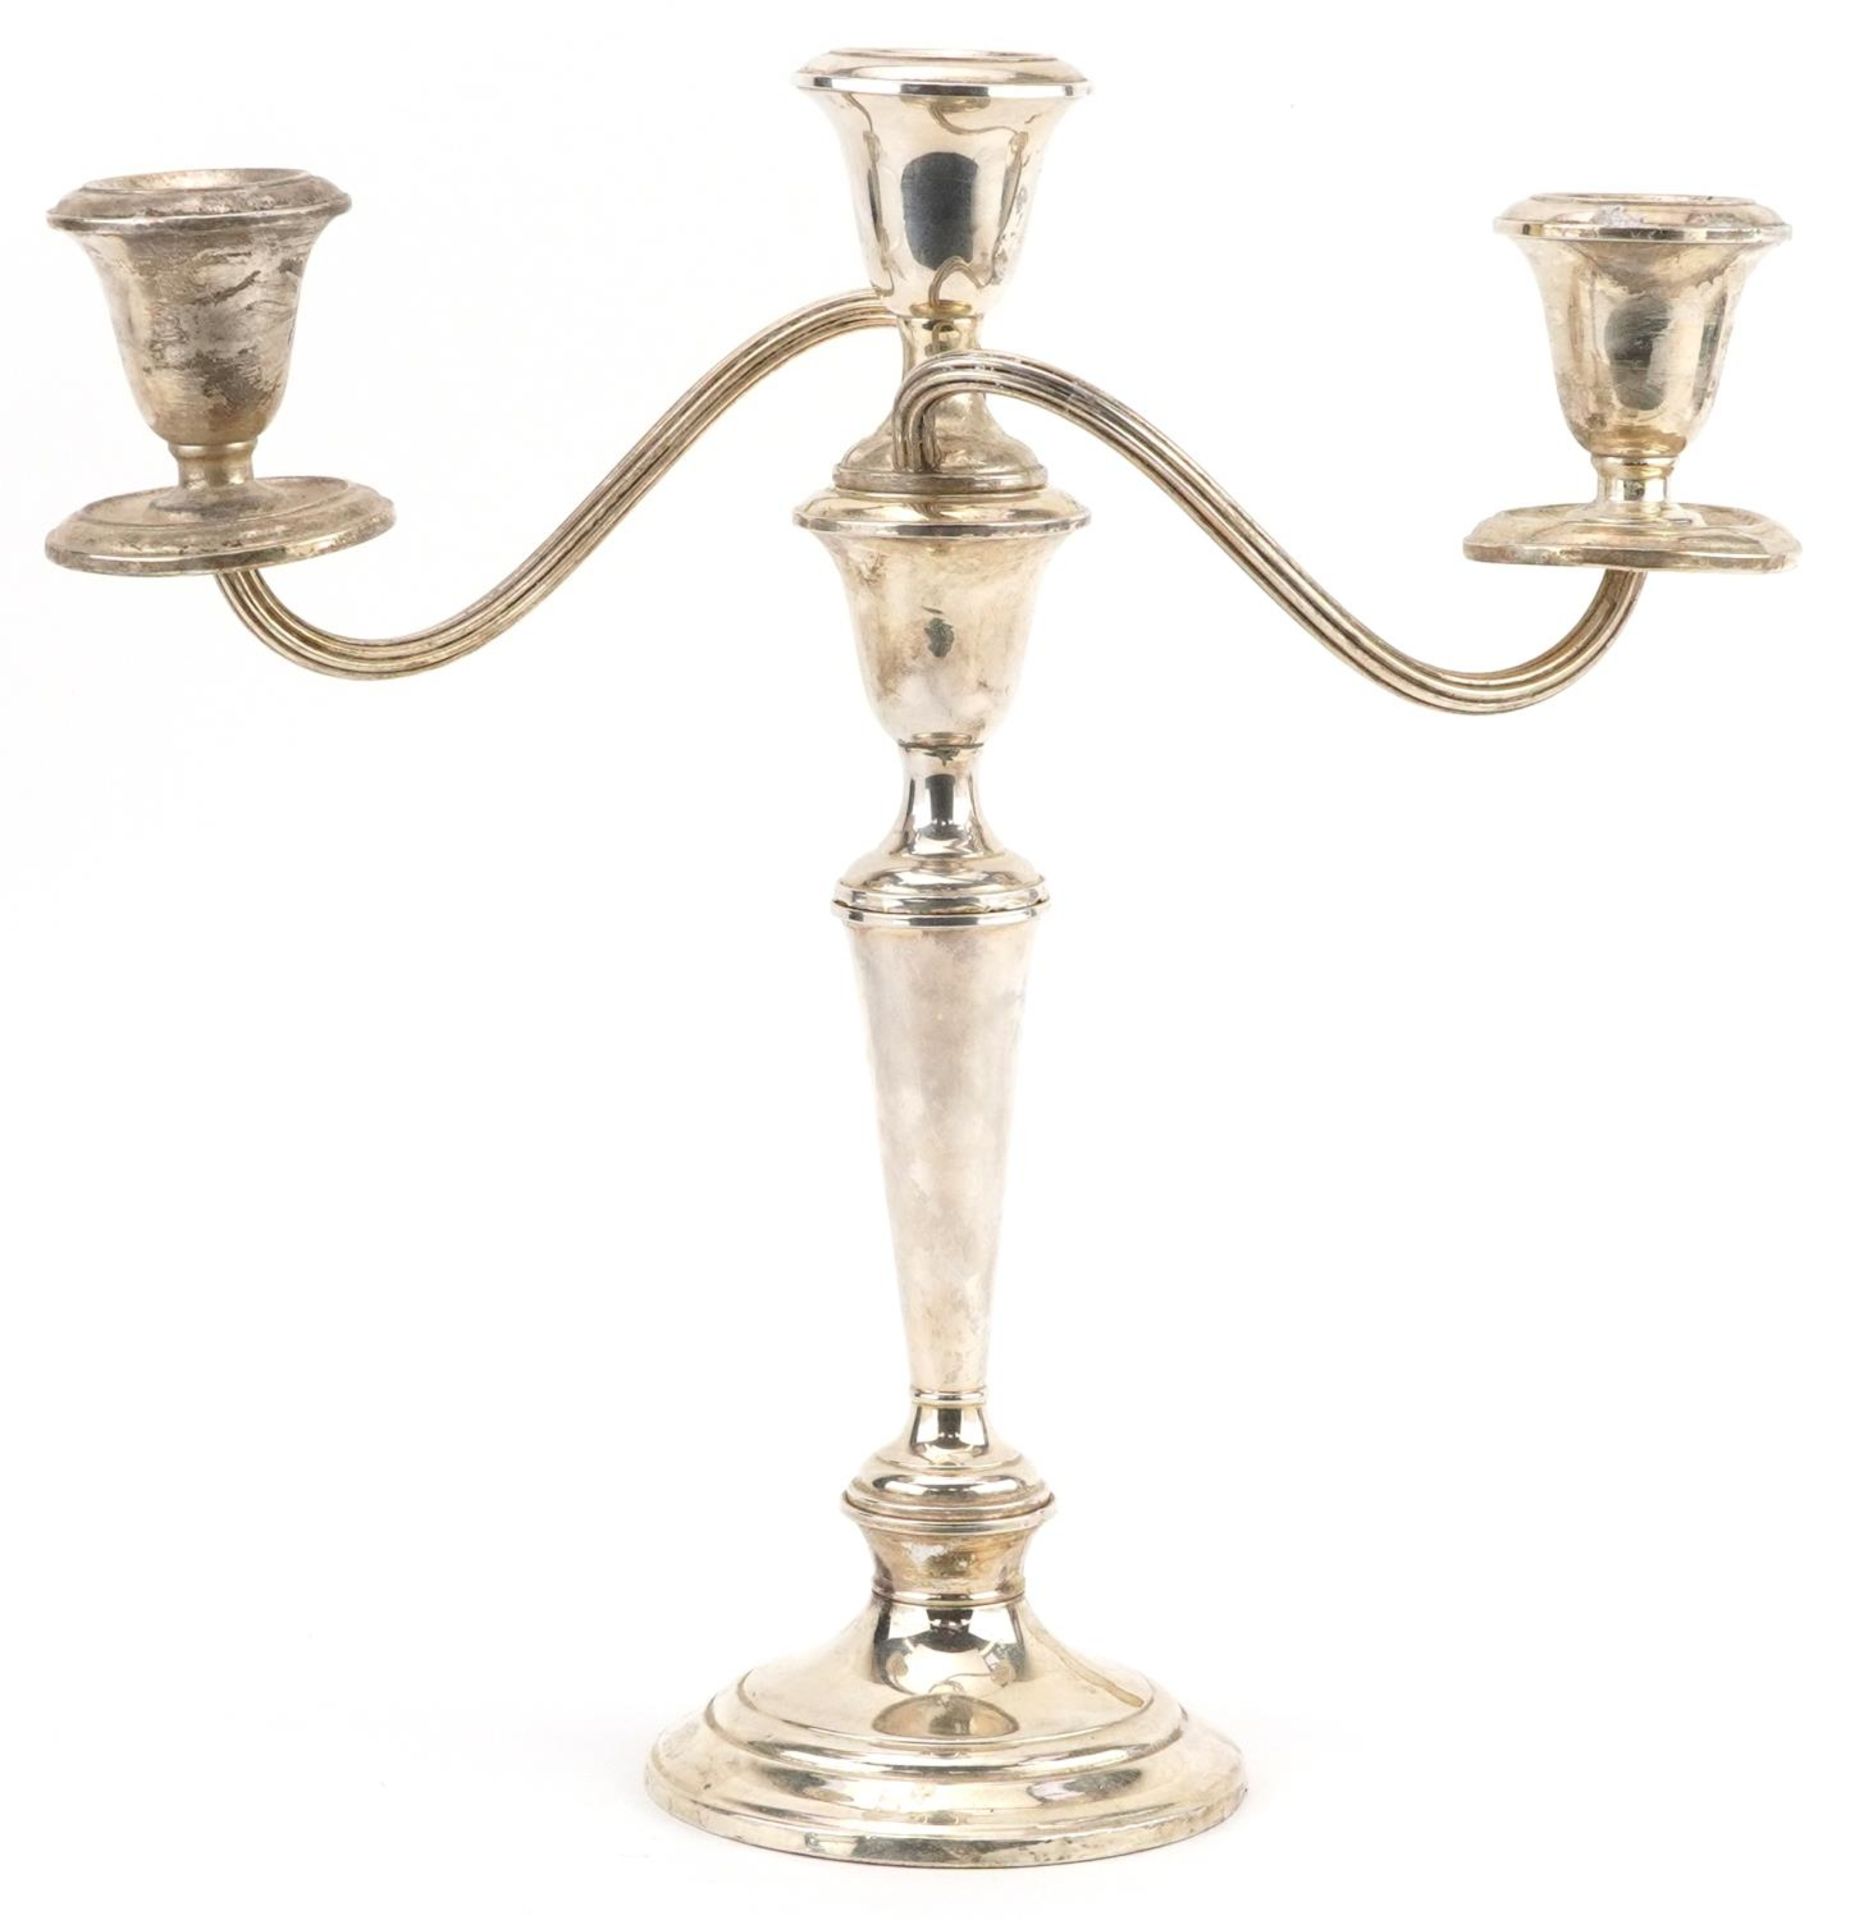 Gorham, American sterling silver three branch candelabra numbered 808/1 to the base, 29.5cm high,